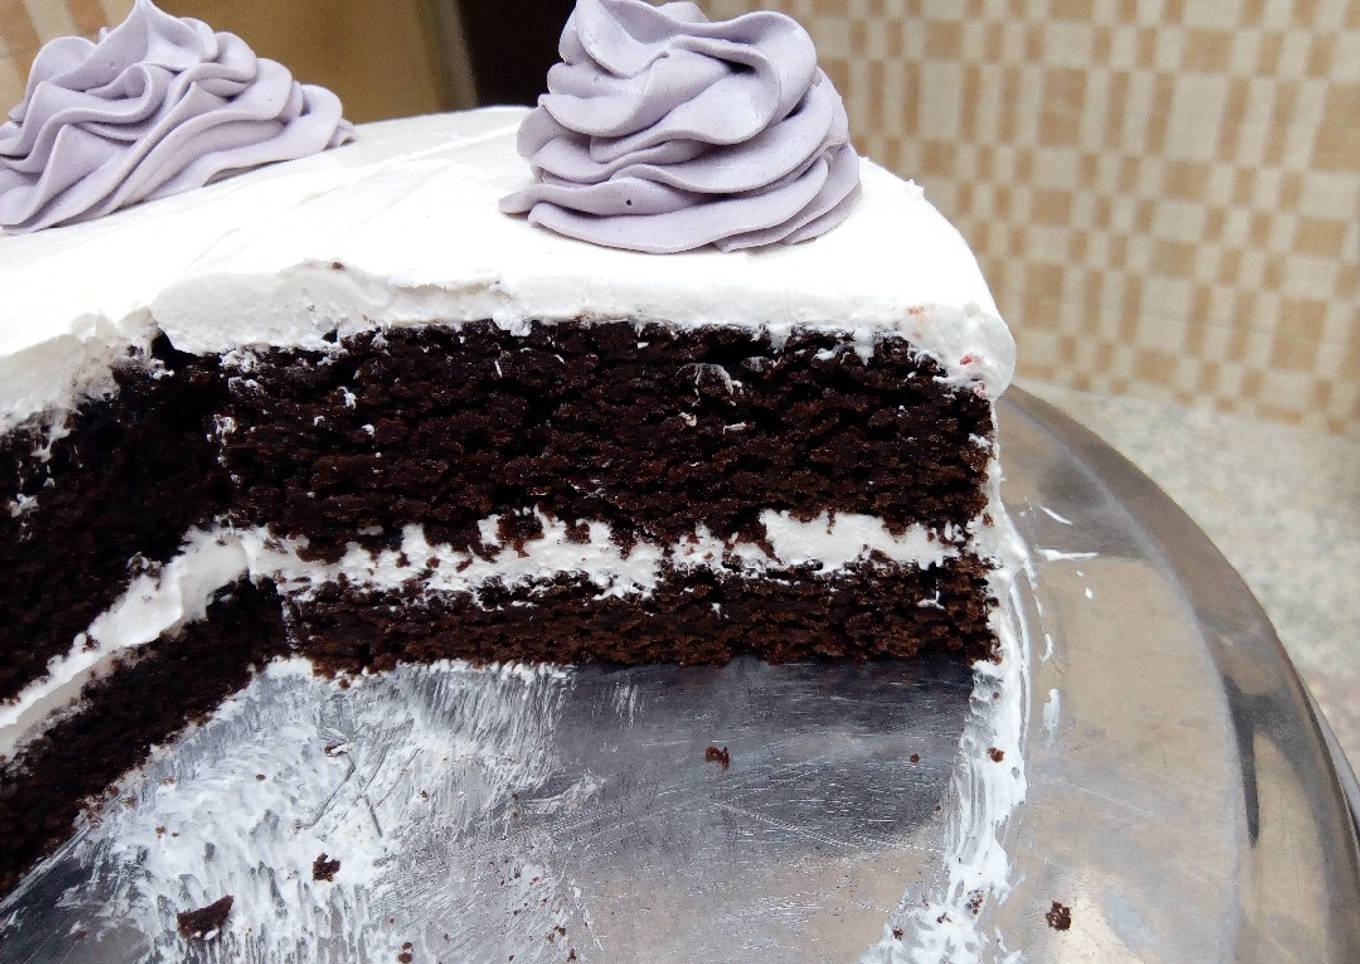 Whipped cream frosted chocolate cake